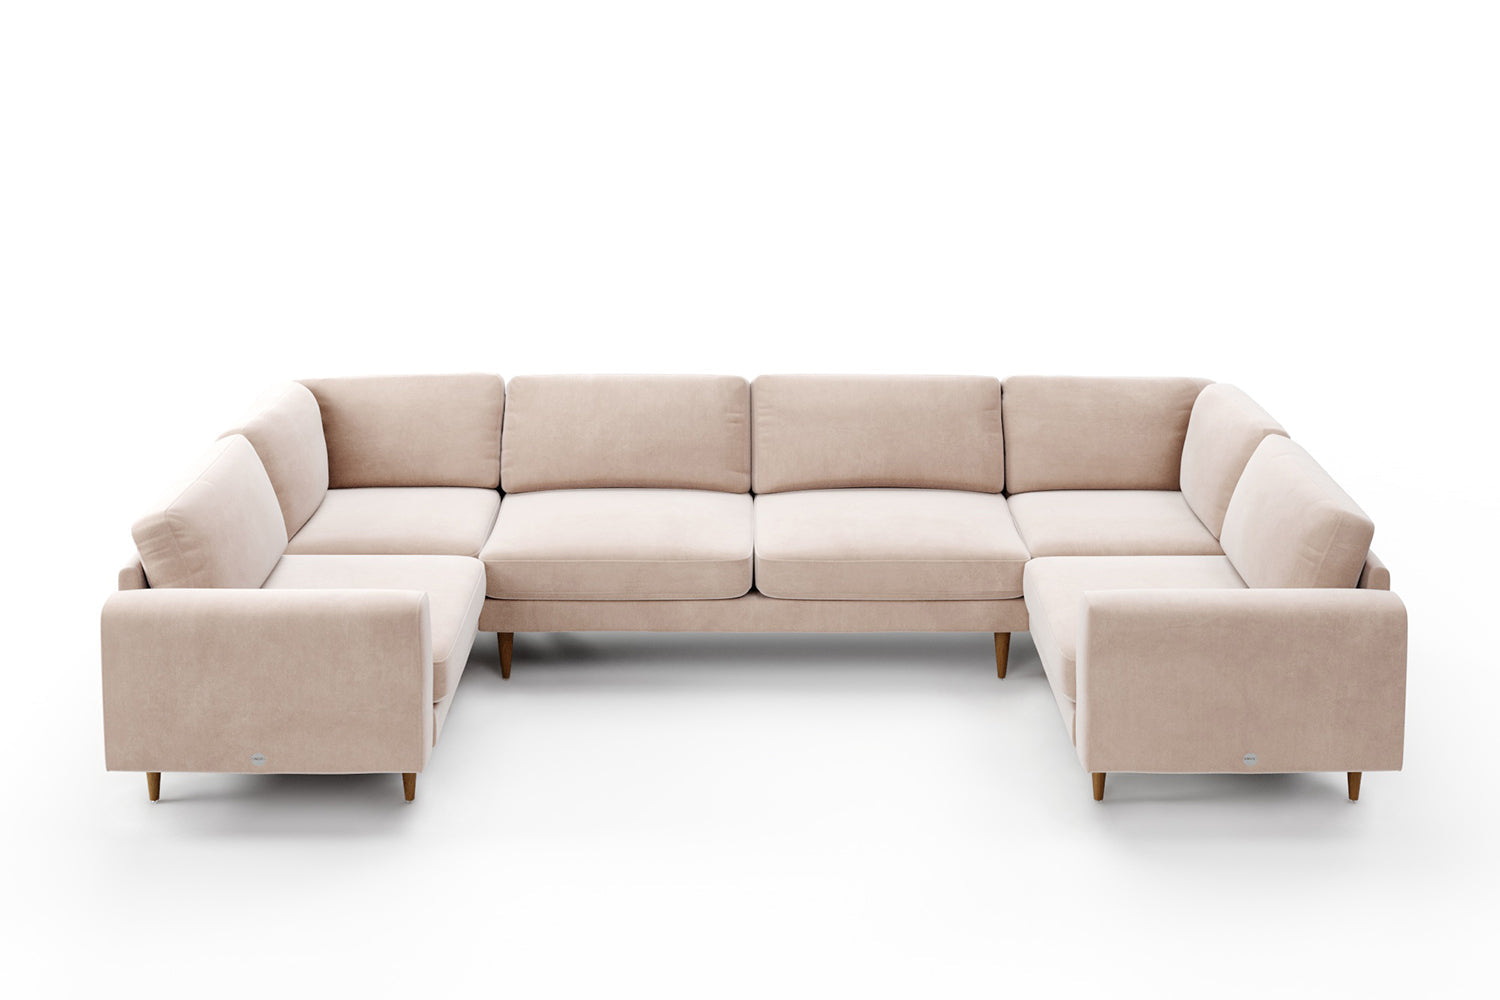 SNUG | The Big Chill Corner Sofa Large in Taupe